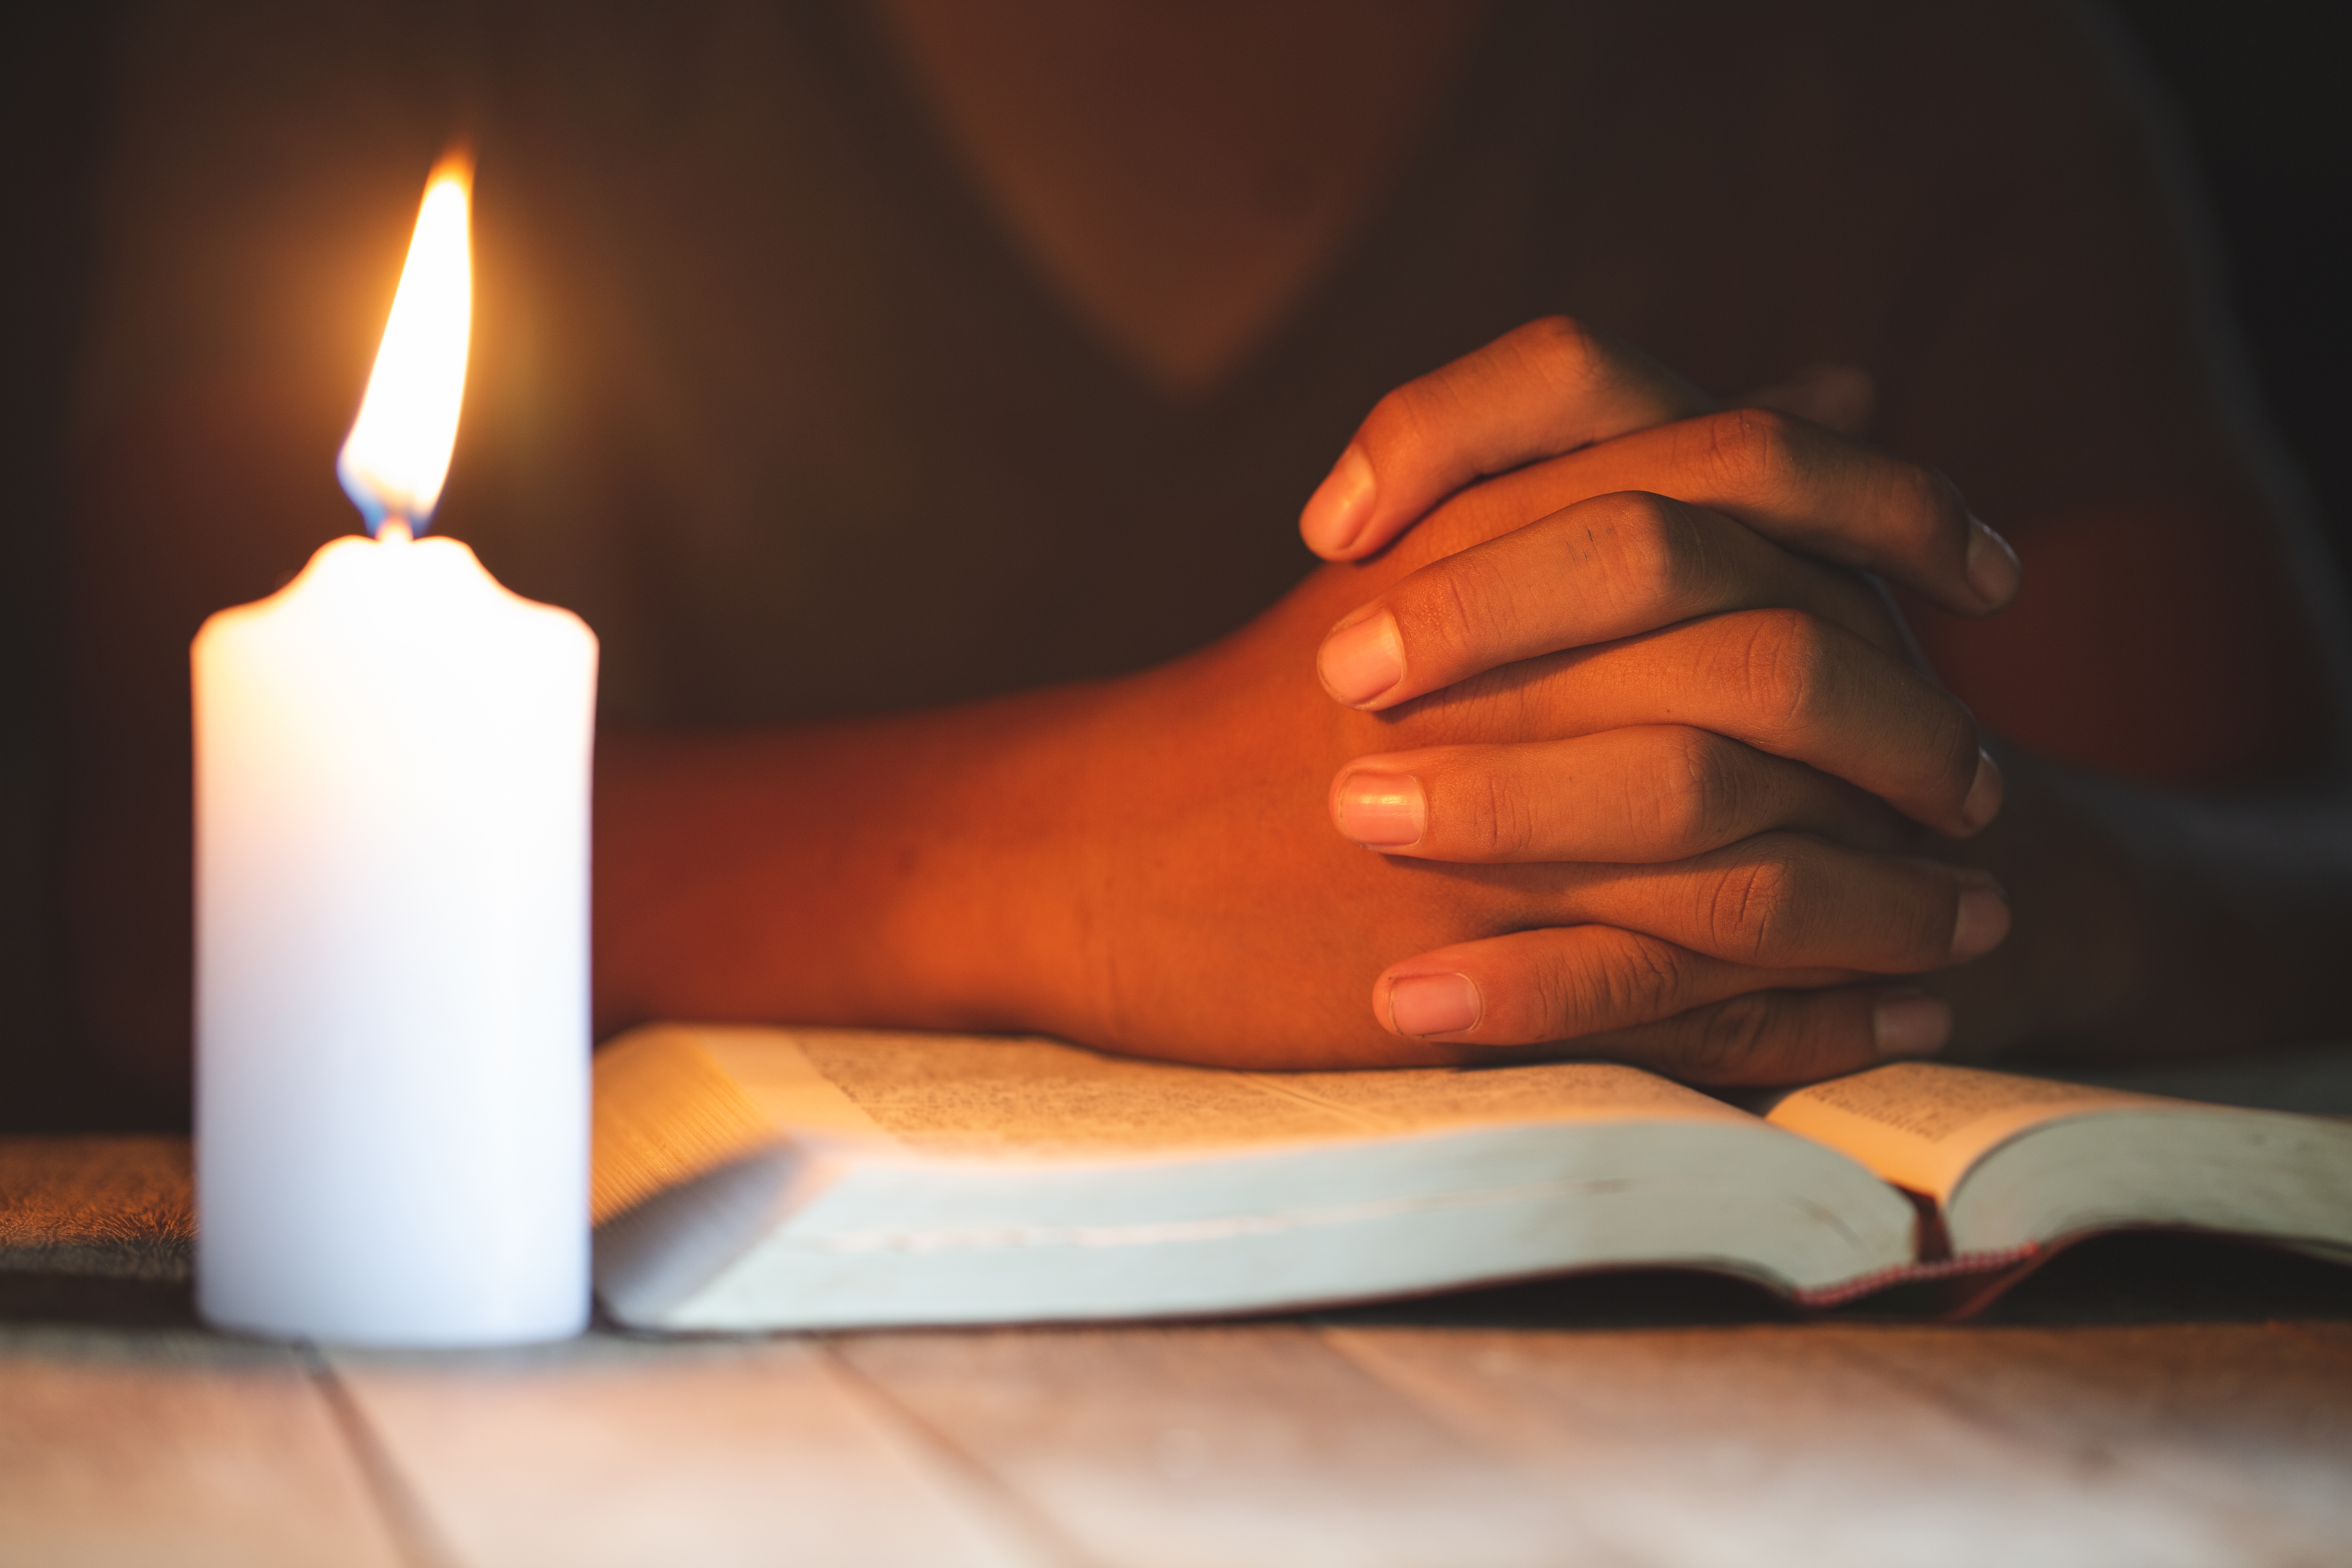 Praying and reading the Bible by candlelight